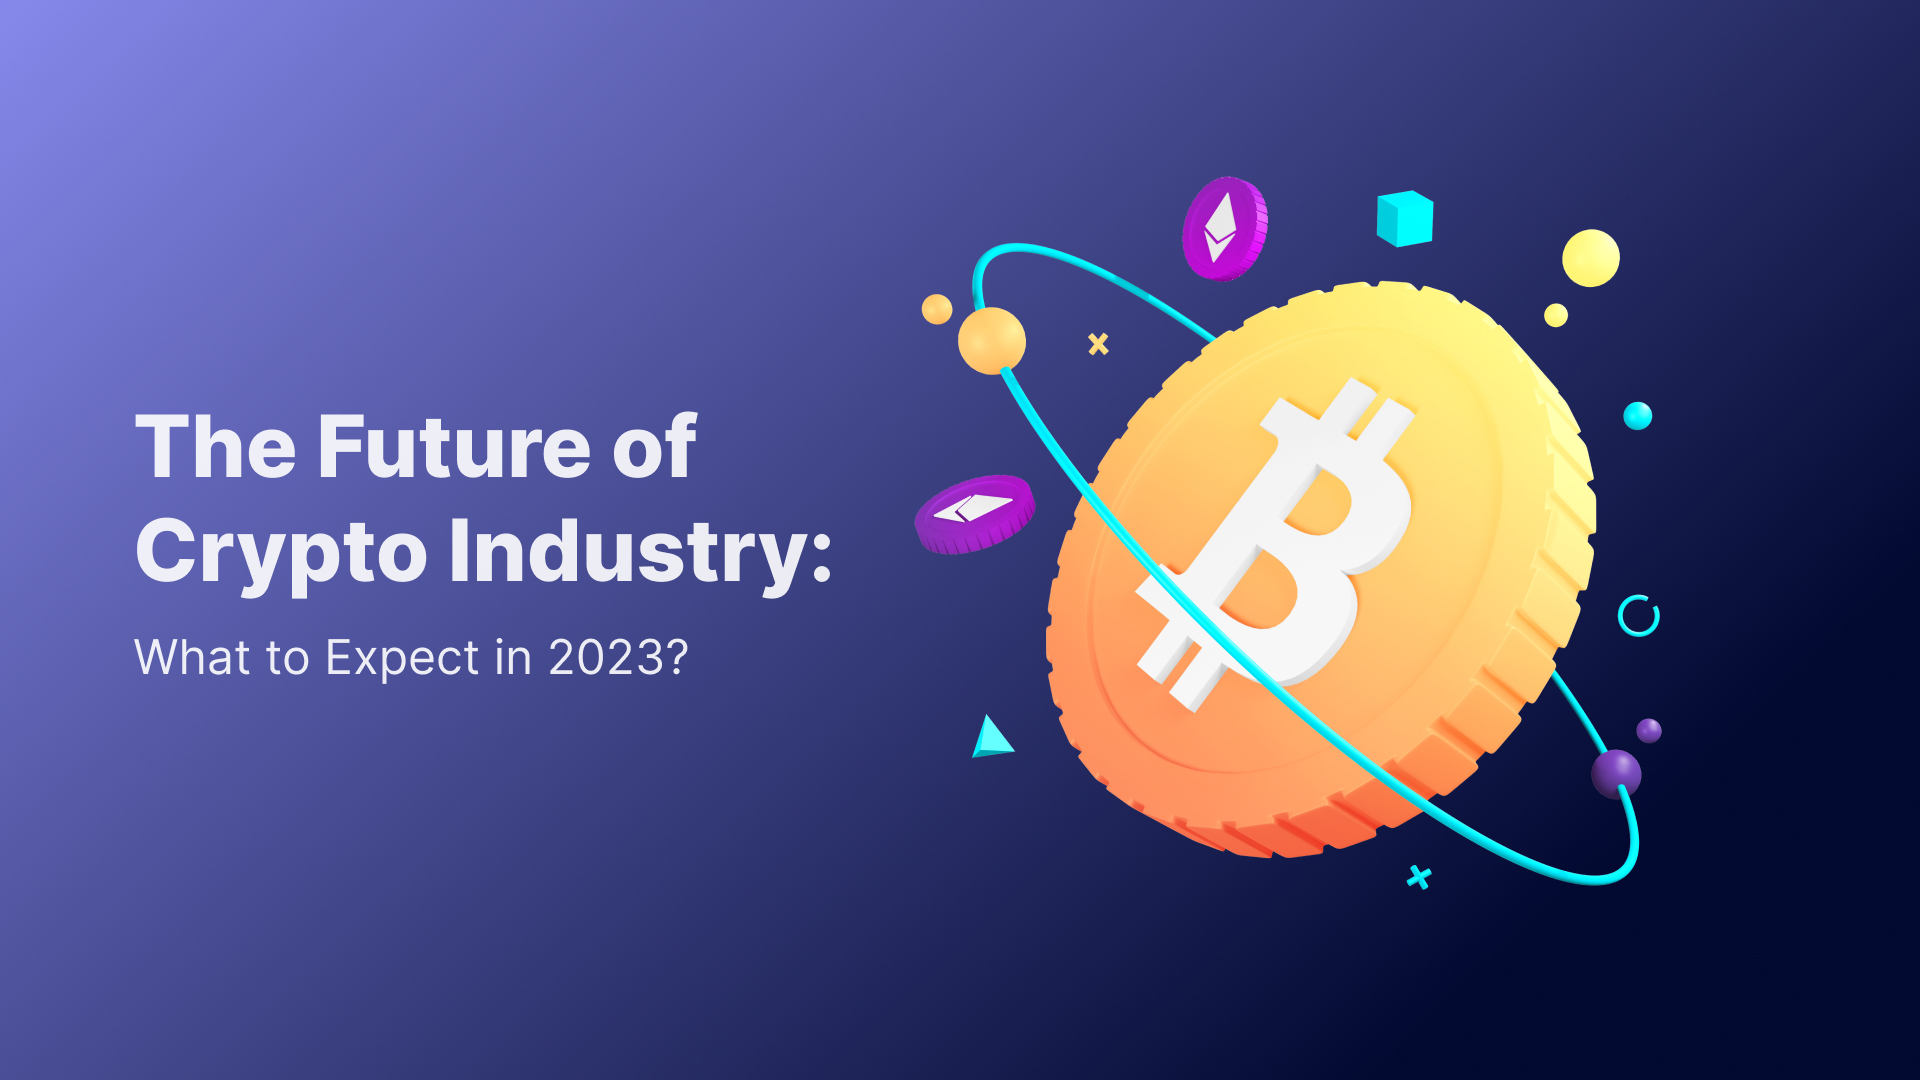 The Future of Crypto Industry: What to Expect in 2023?